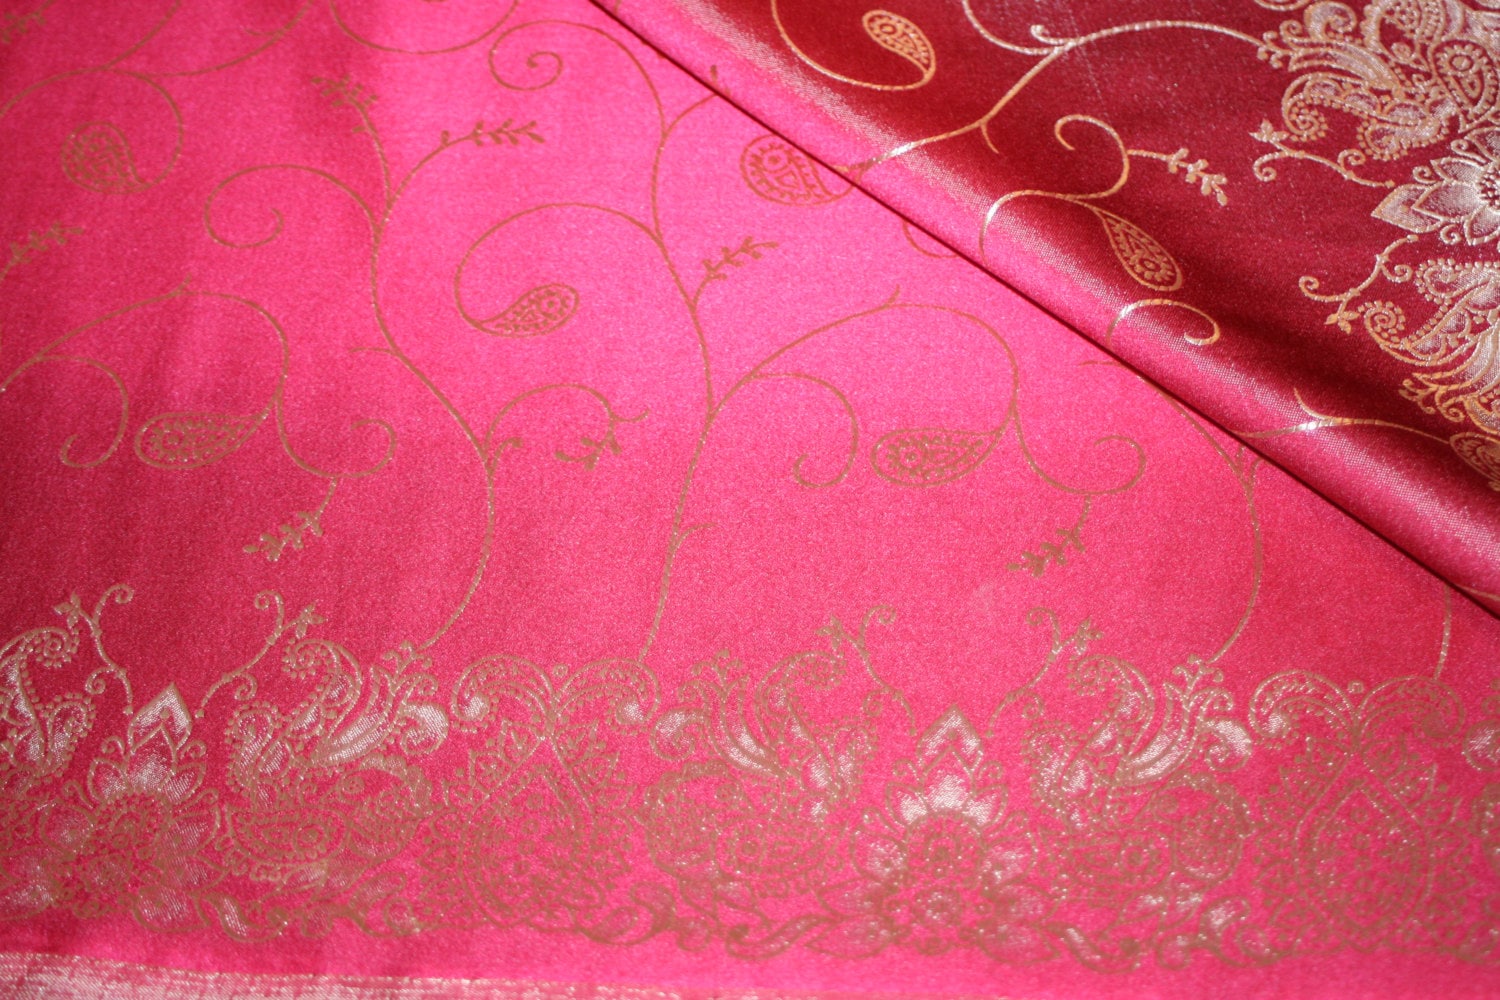 Hot Pink and Peach Floral Brocade Fabric 44 inches wide